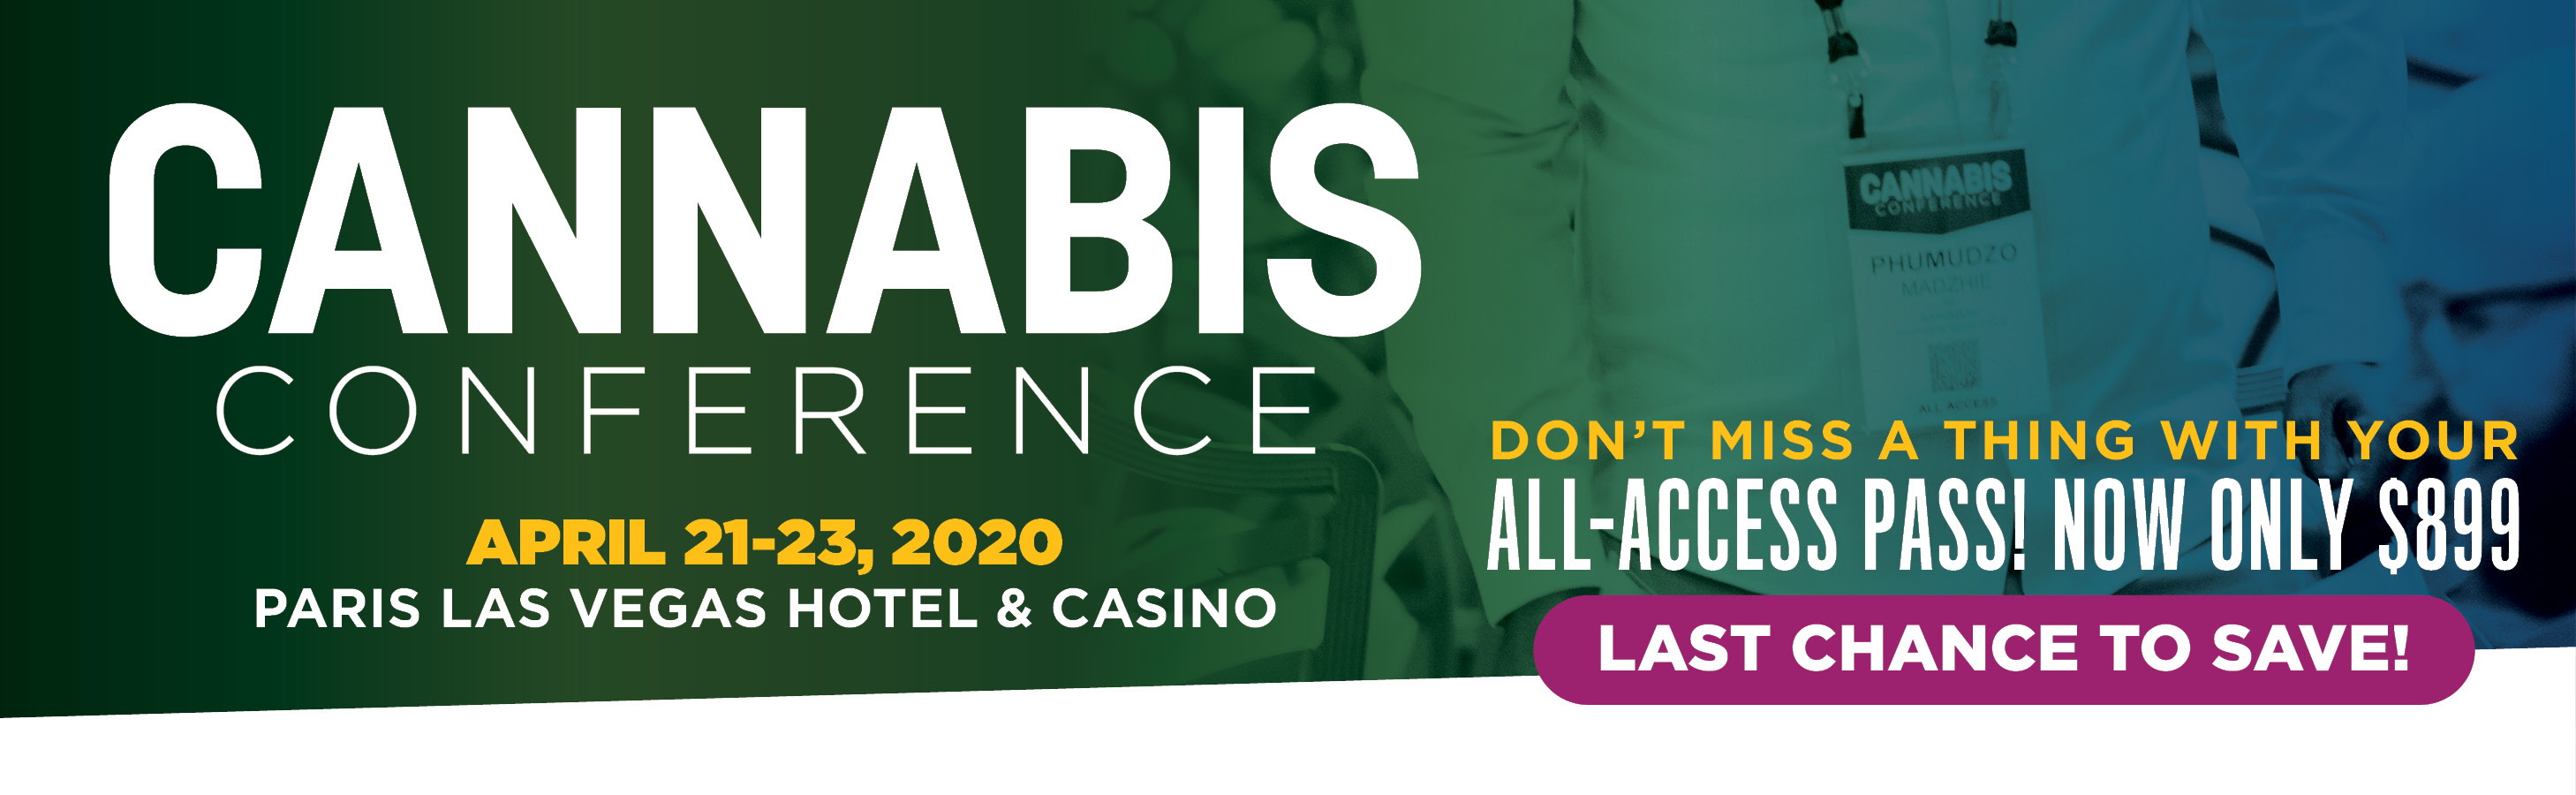 Cannabis Conference 2020